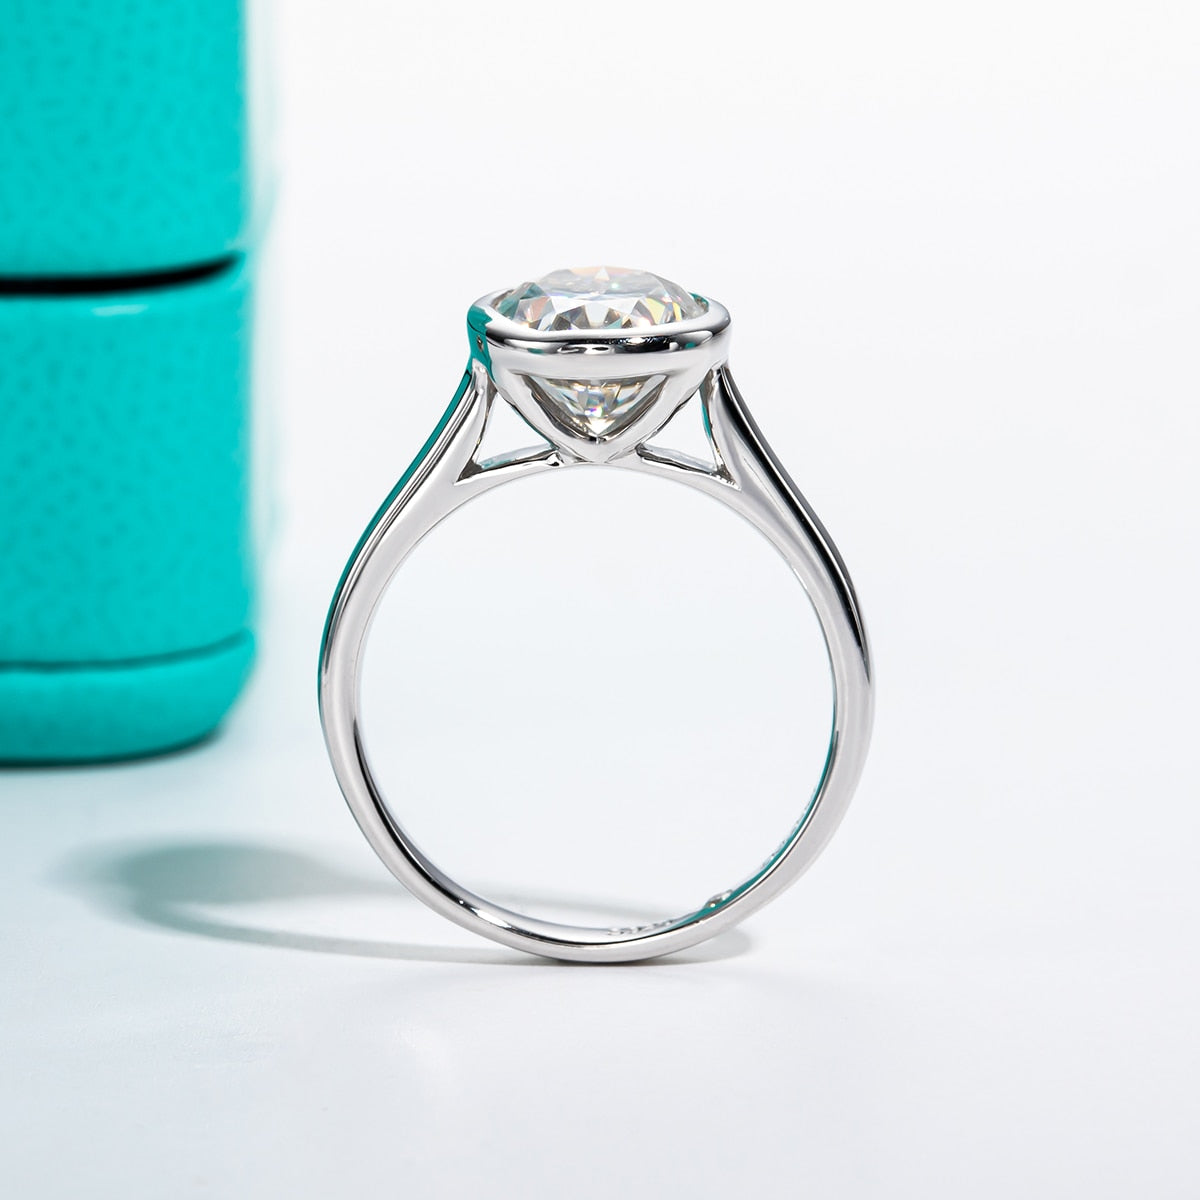 3CT oval cut moissanite set in a sterling silver bezel style setting.